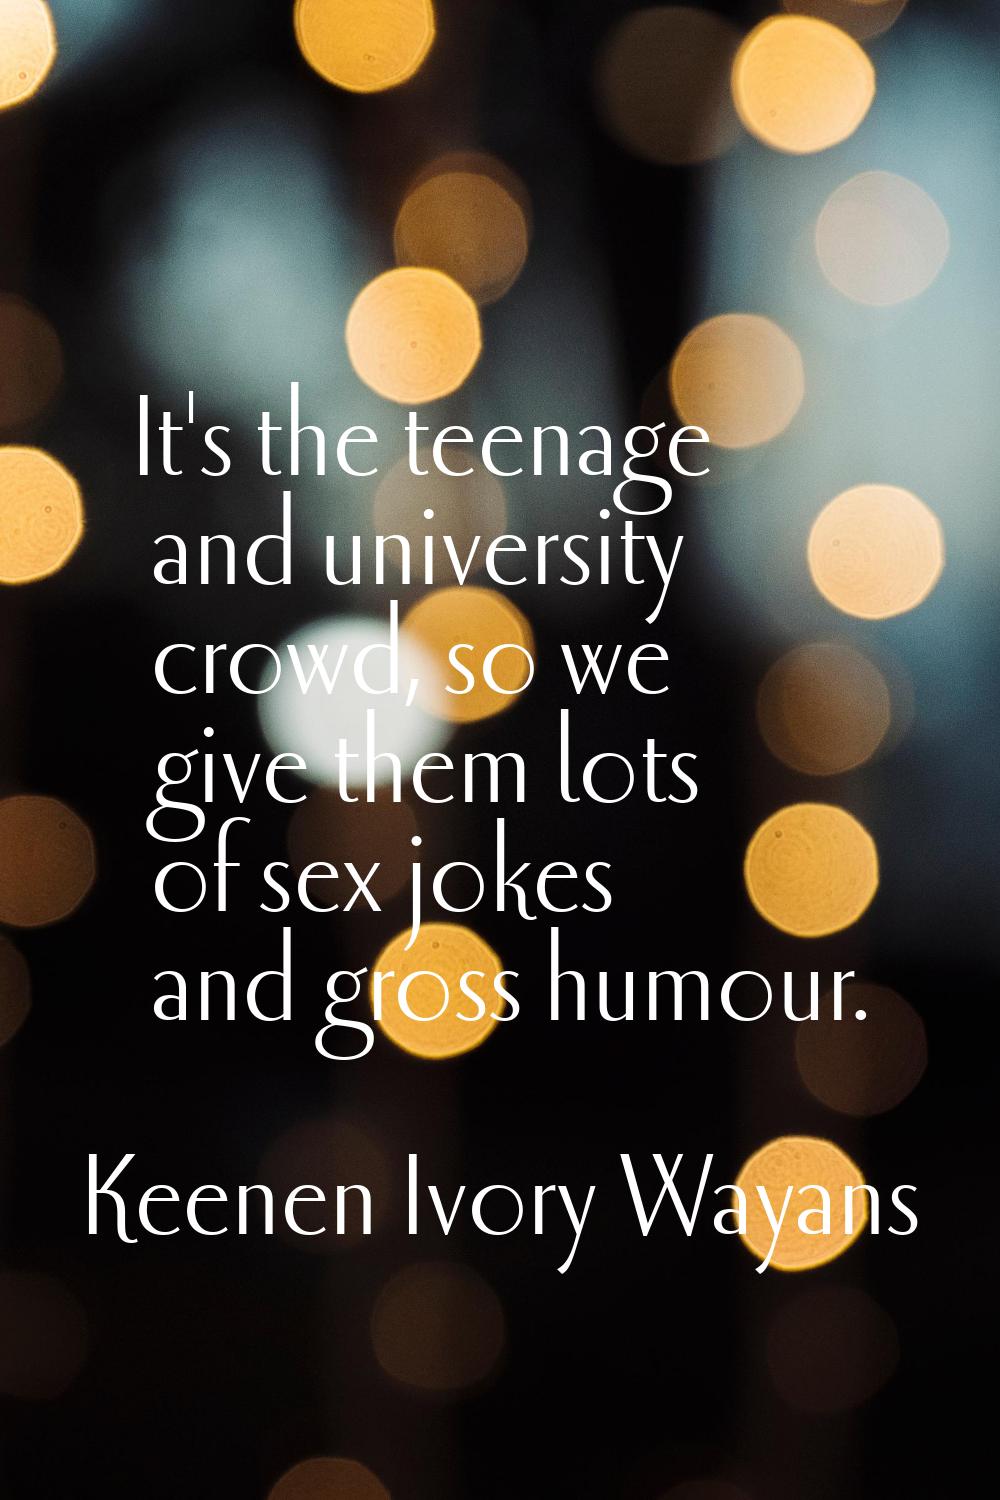 It's the teenage and university crowd, so we give them lots of sex jokes and gross humour.